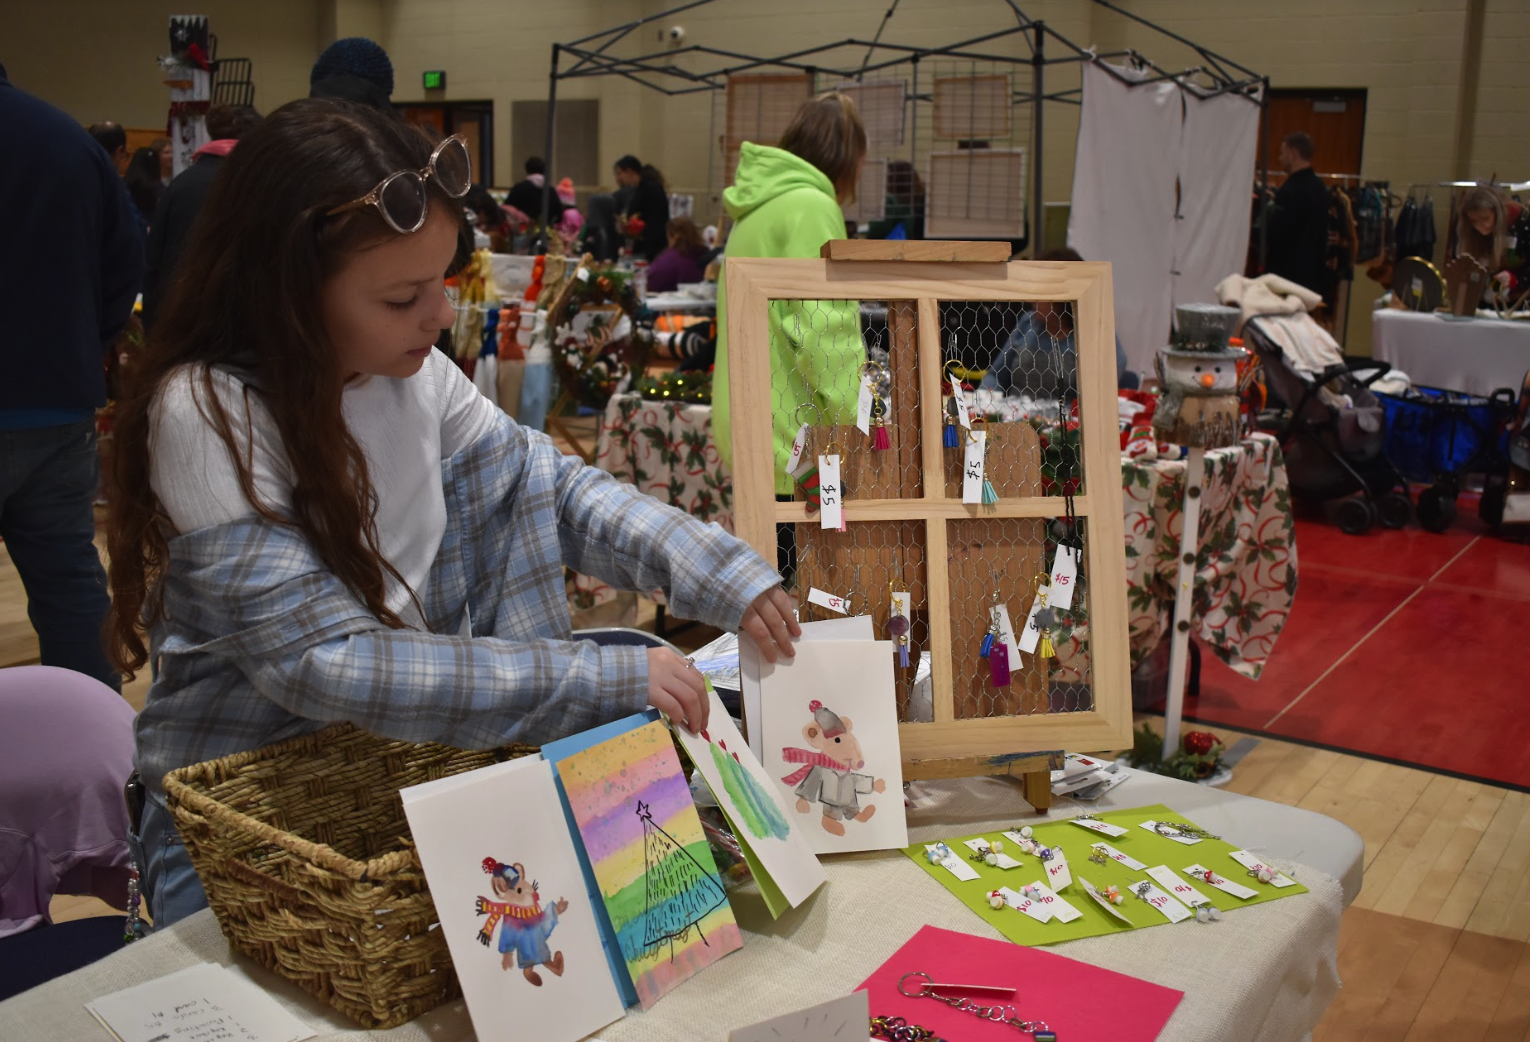 ICS student setting up artwork for sale at the Holiday Craft Fair.